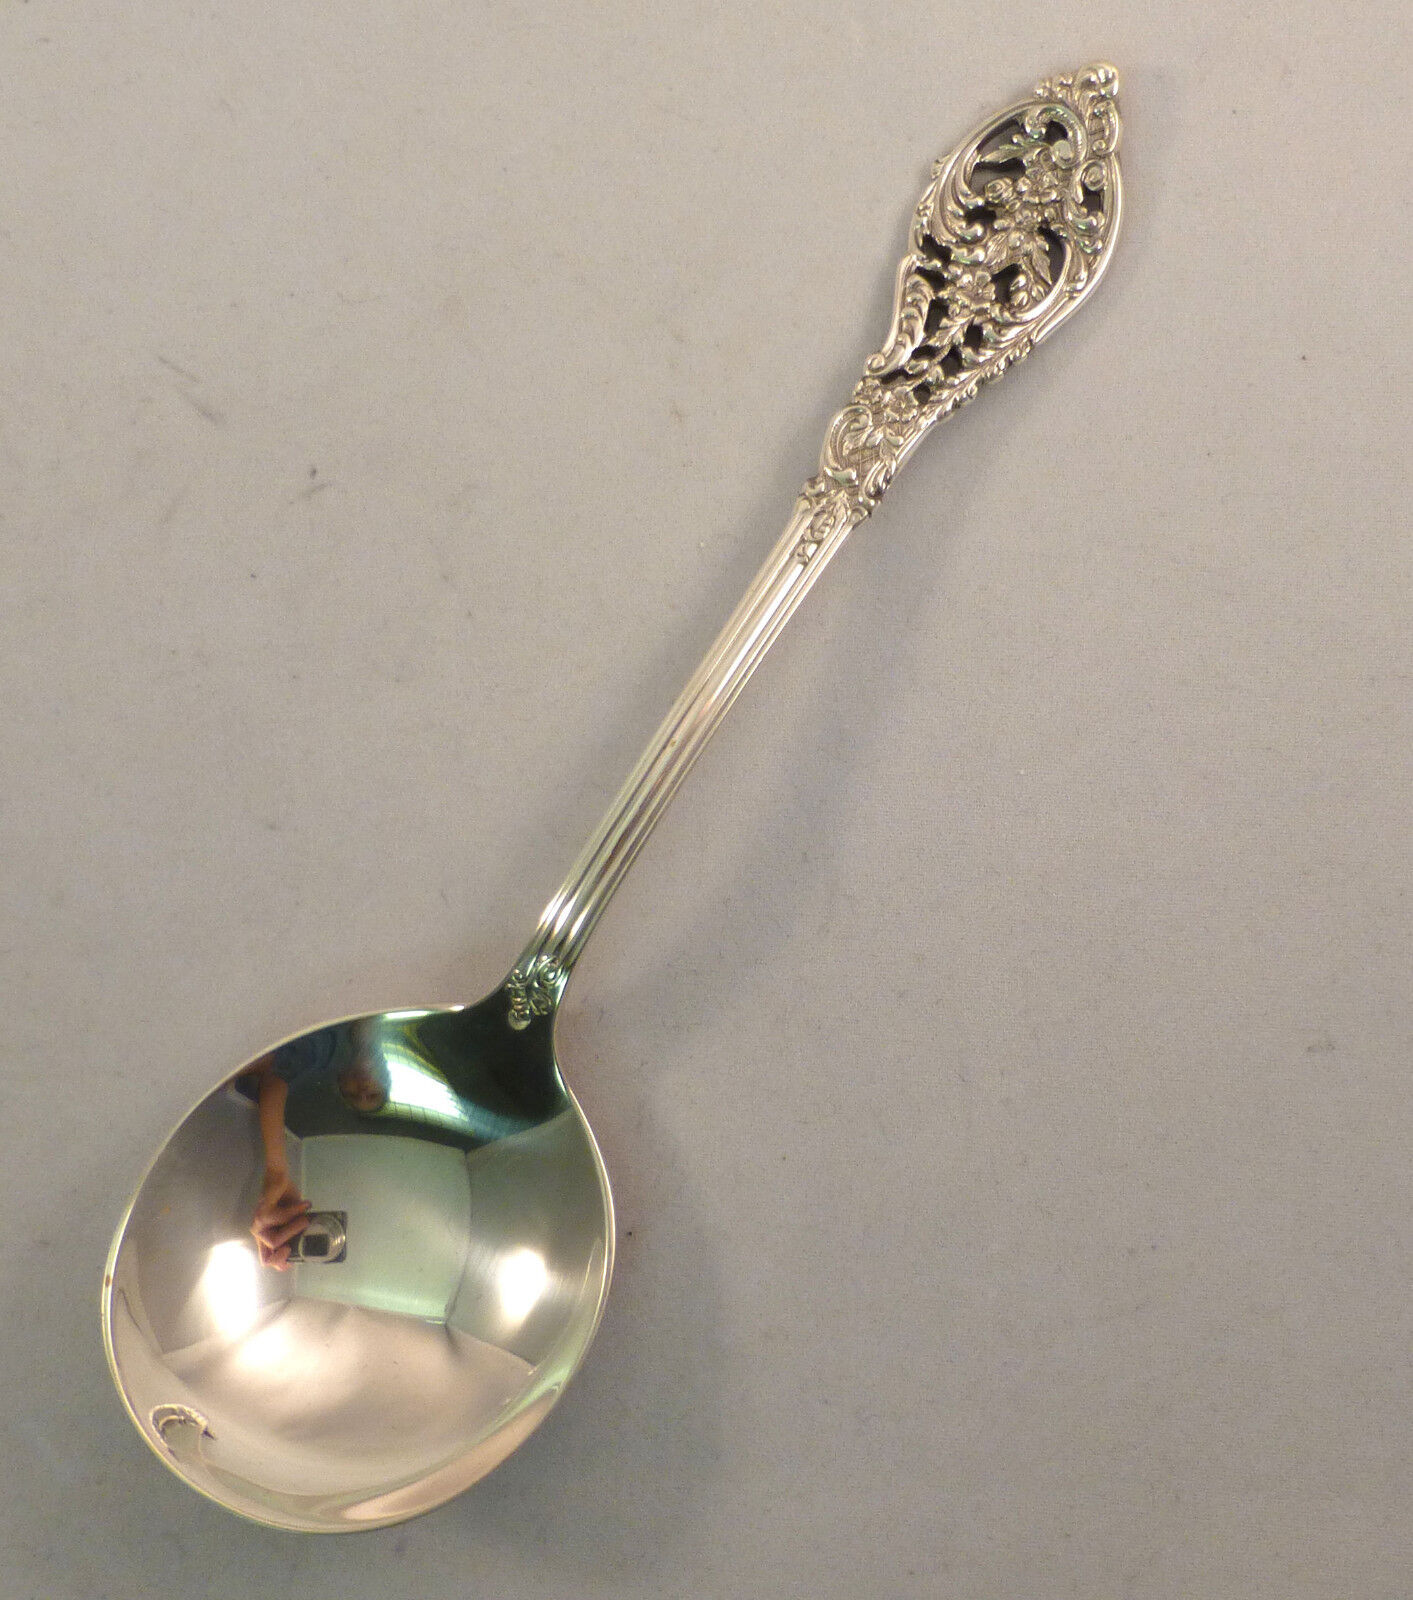 Florentine Lace-Reed & Barton Sterling Cream Soup Spoon(s) W/ Round Bowl